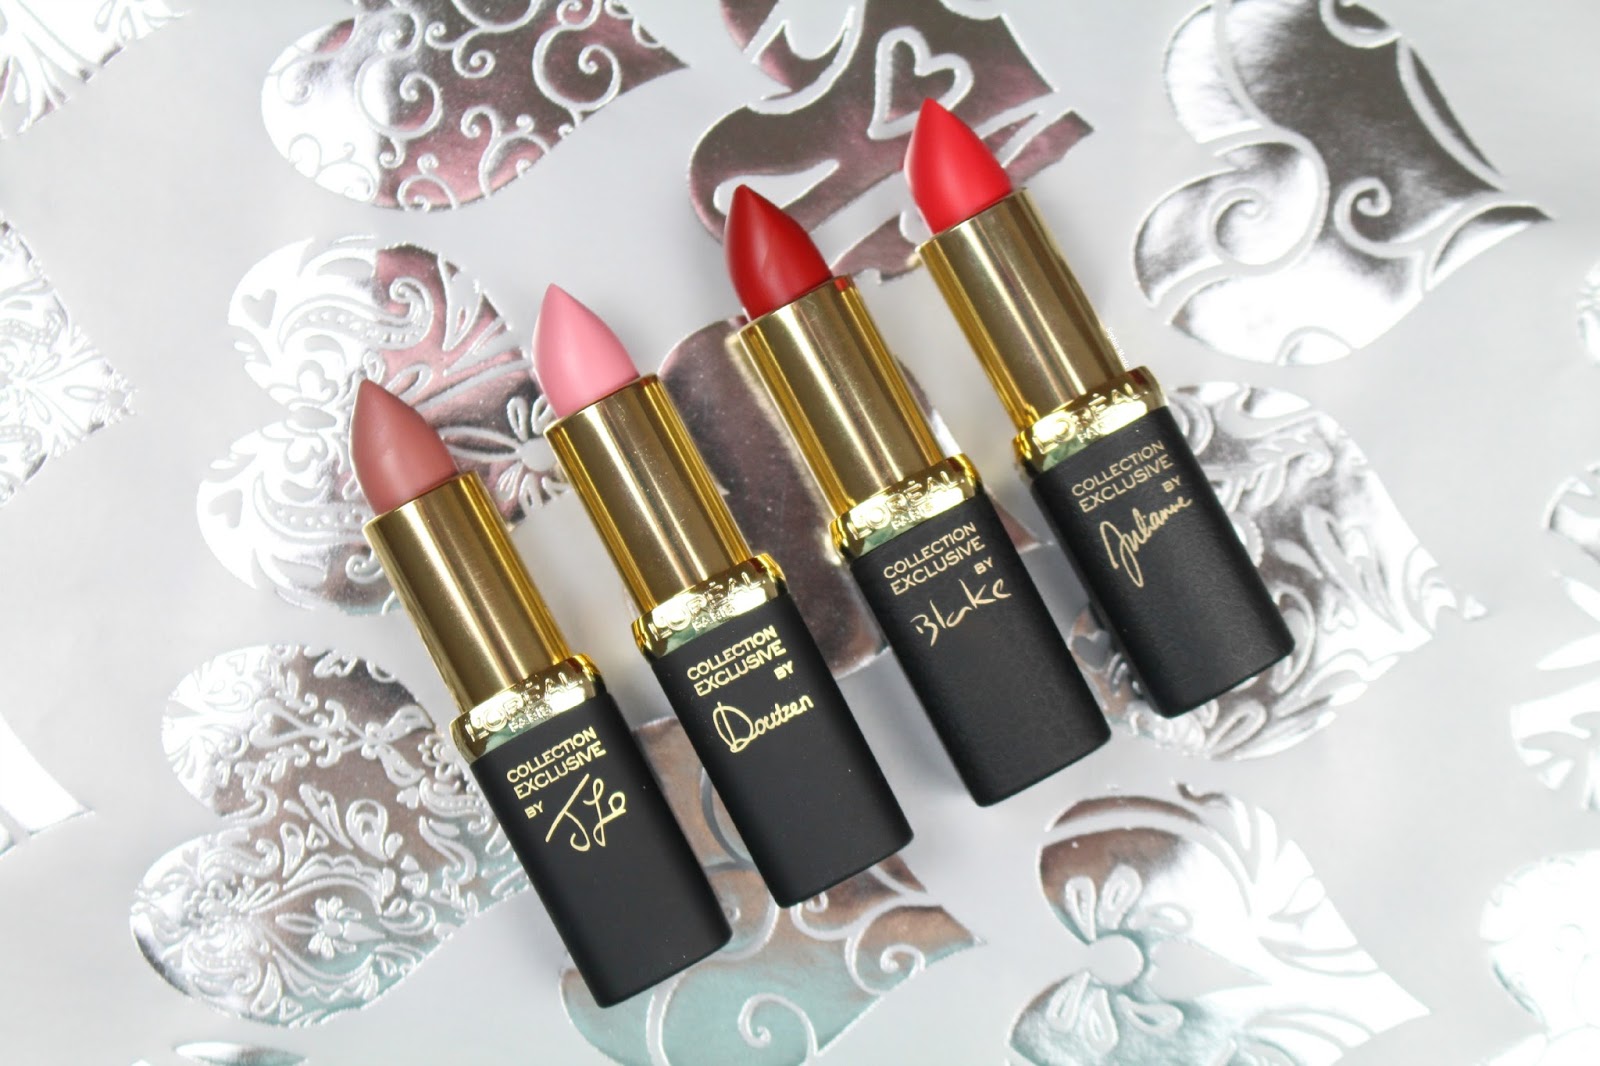 L'Oreal Collection Exclusive Lipsticks Nudes & Reds. 